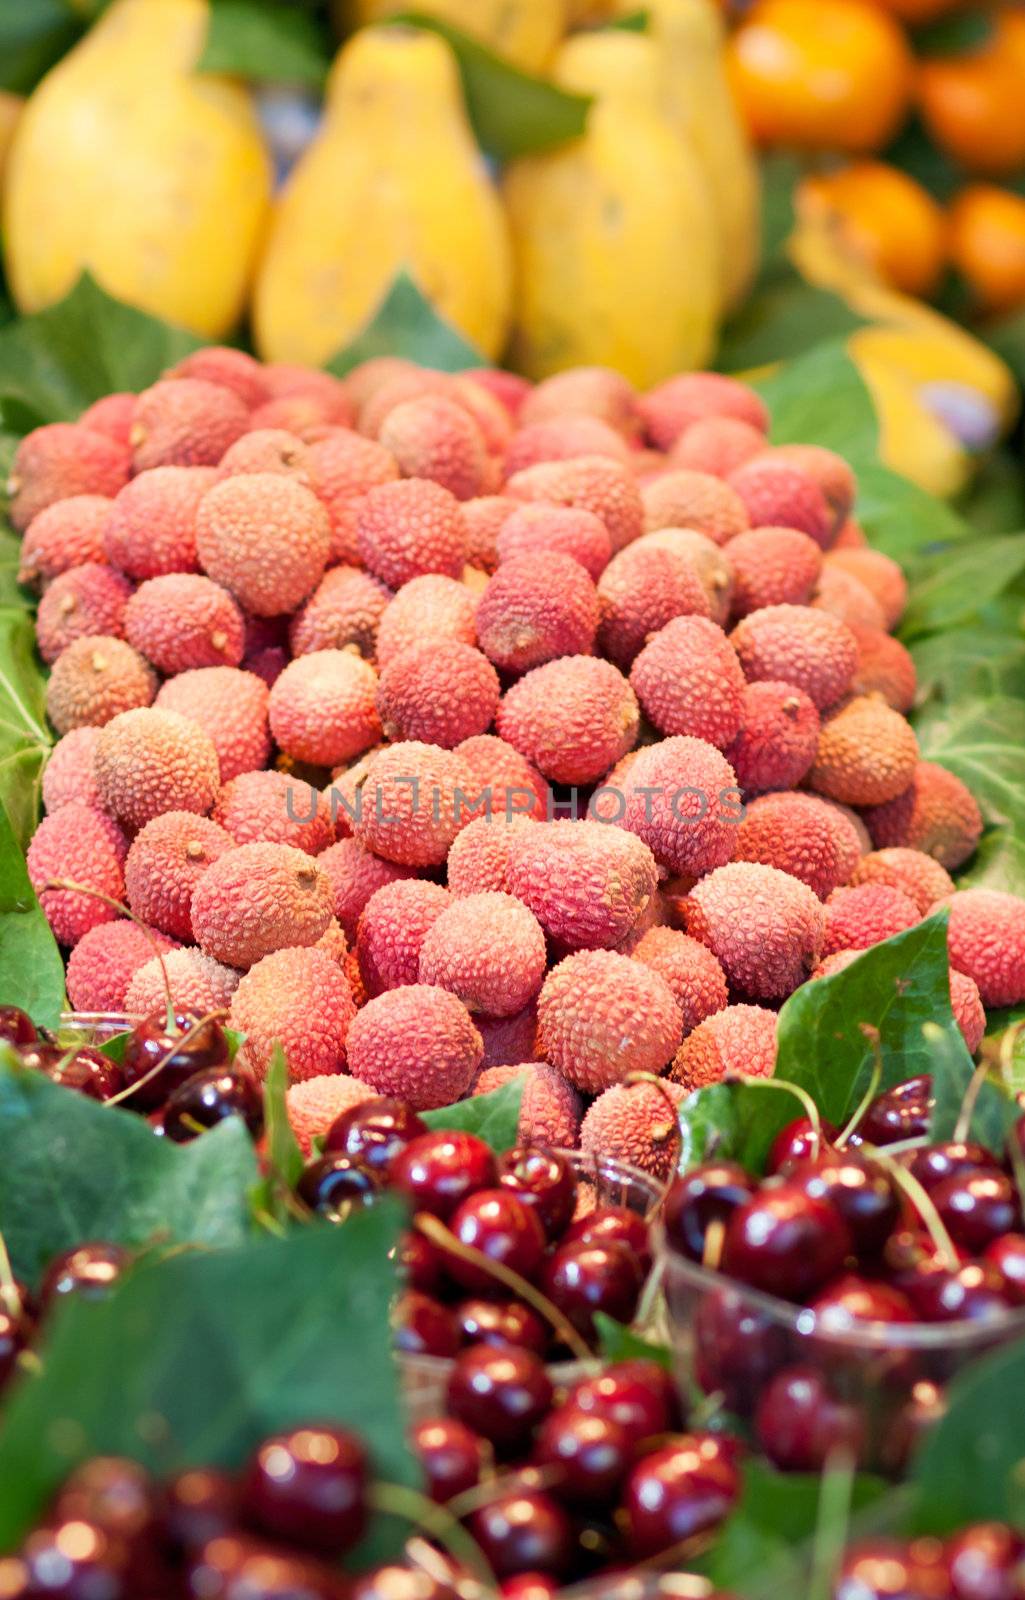 Lychees and other fruits on a market stall